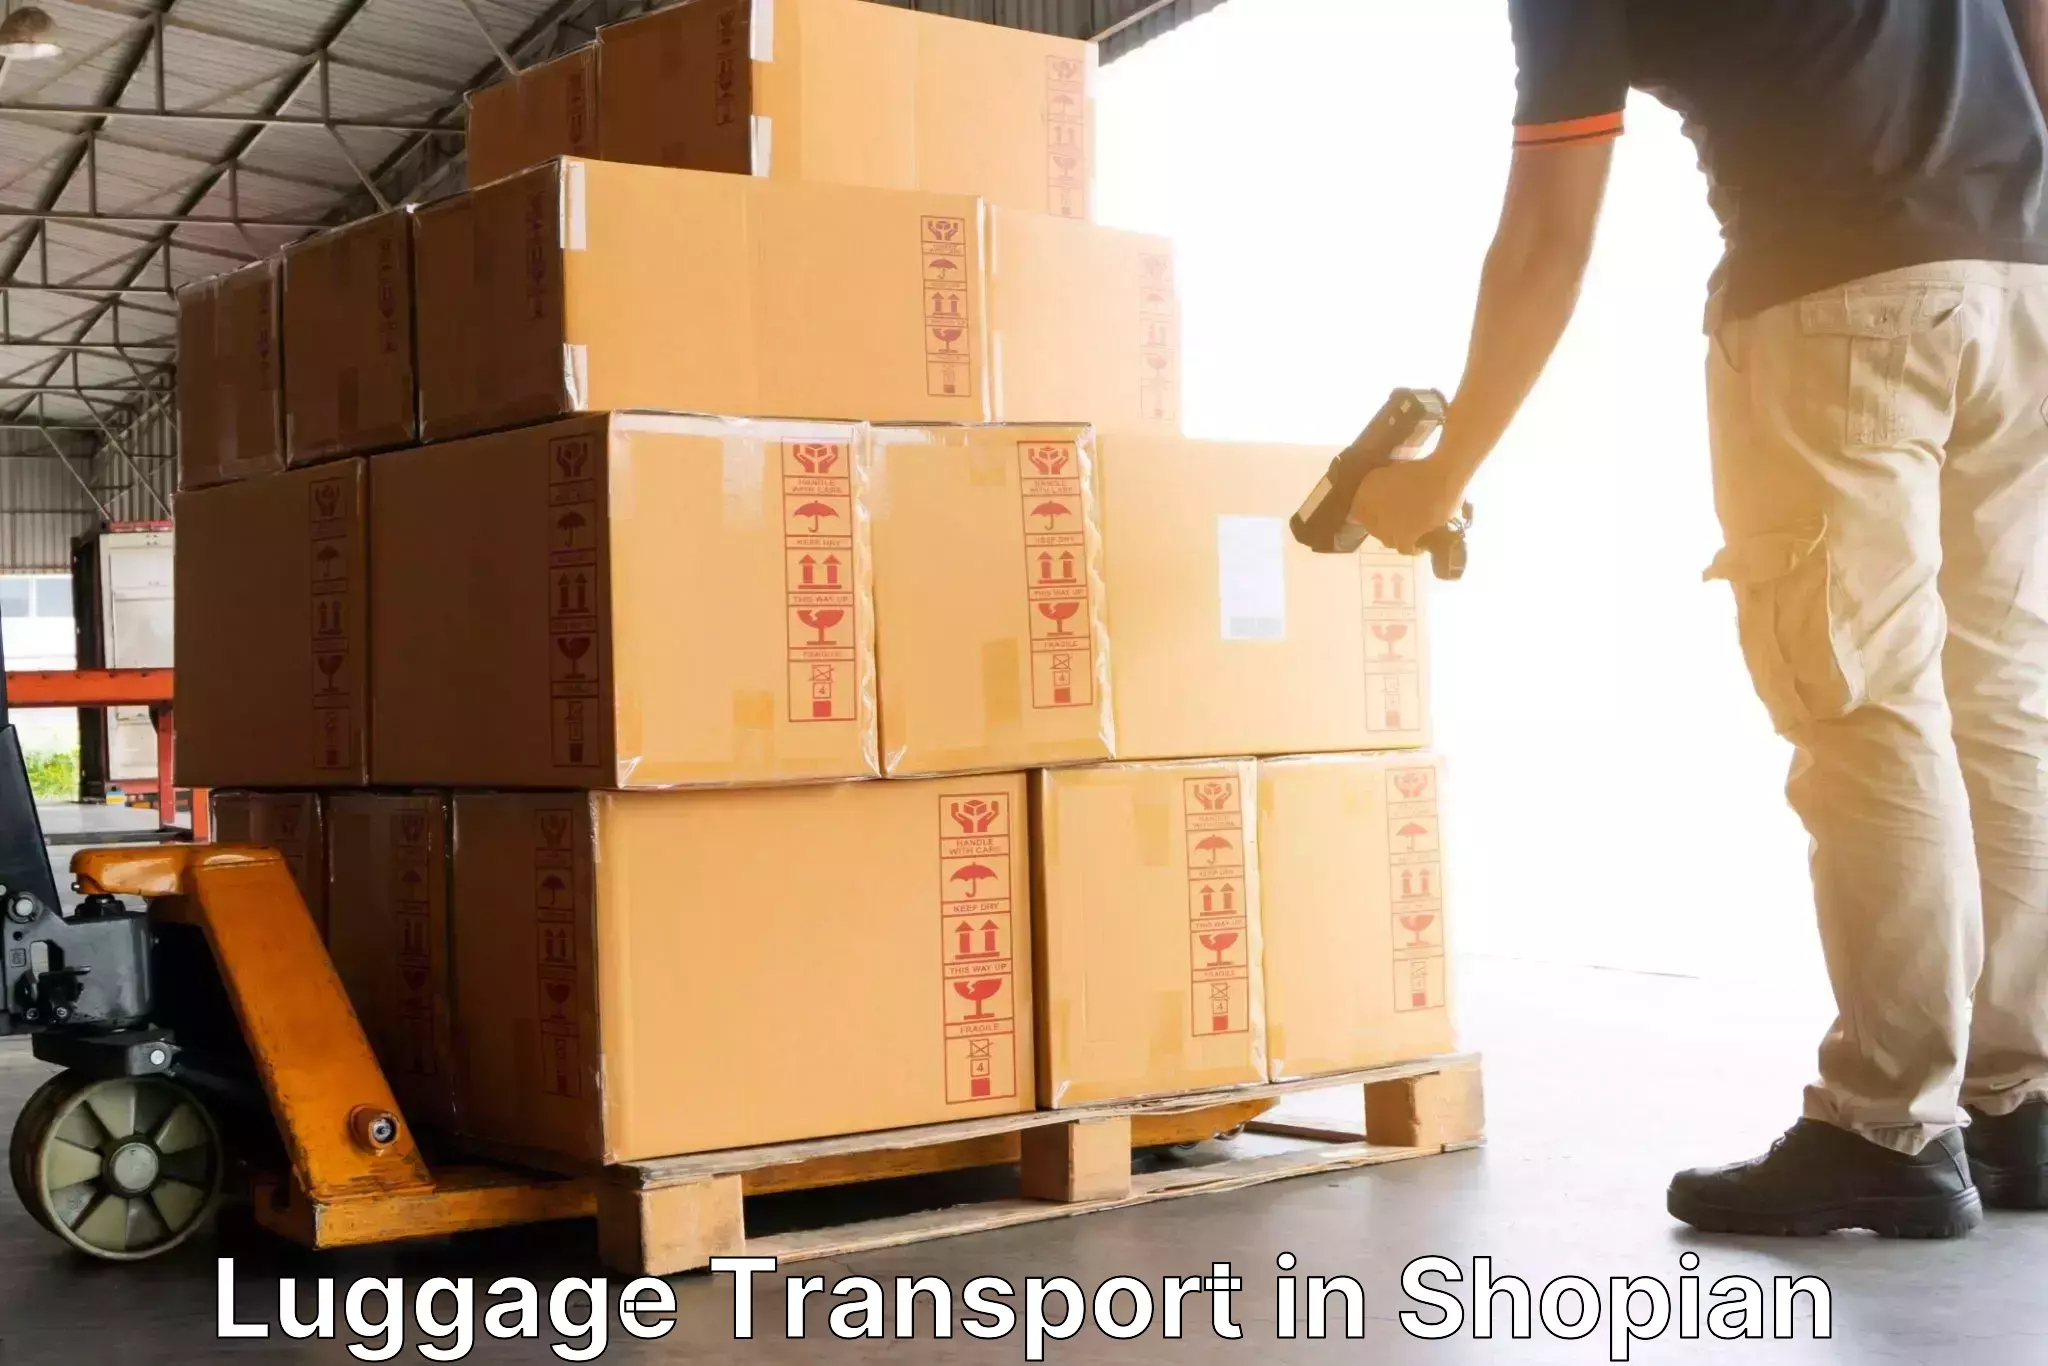 Luggage shipping rates in Shopian